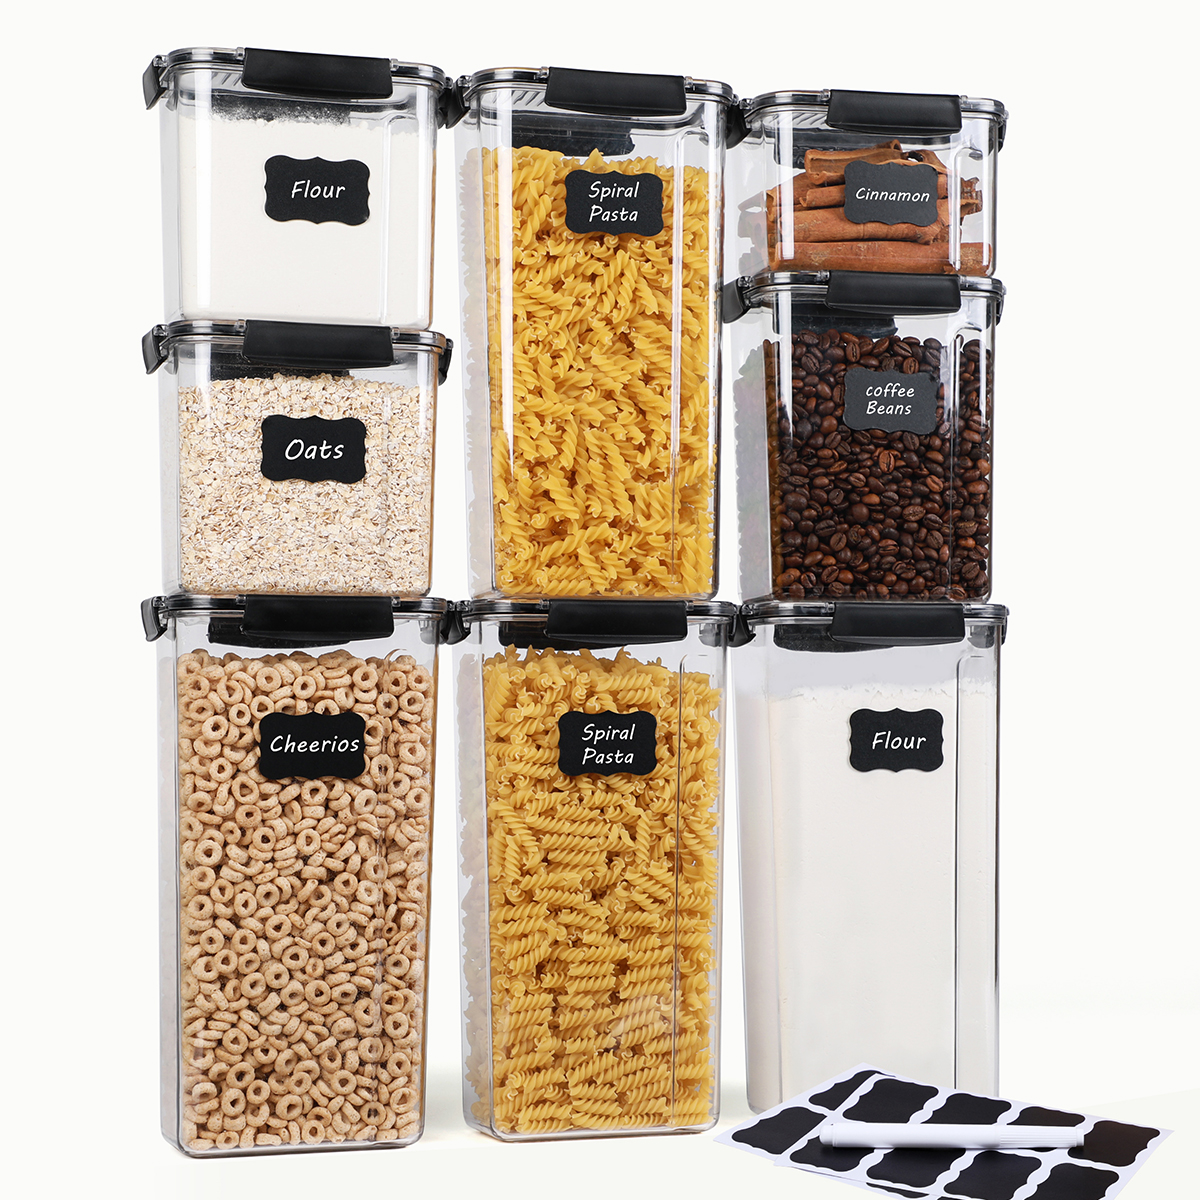 New Design for Pantry and airtight food storage containers 8 pack set